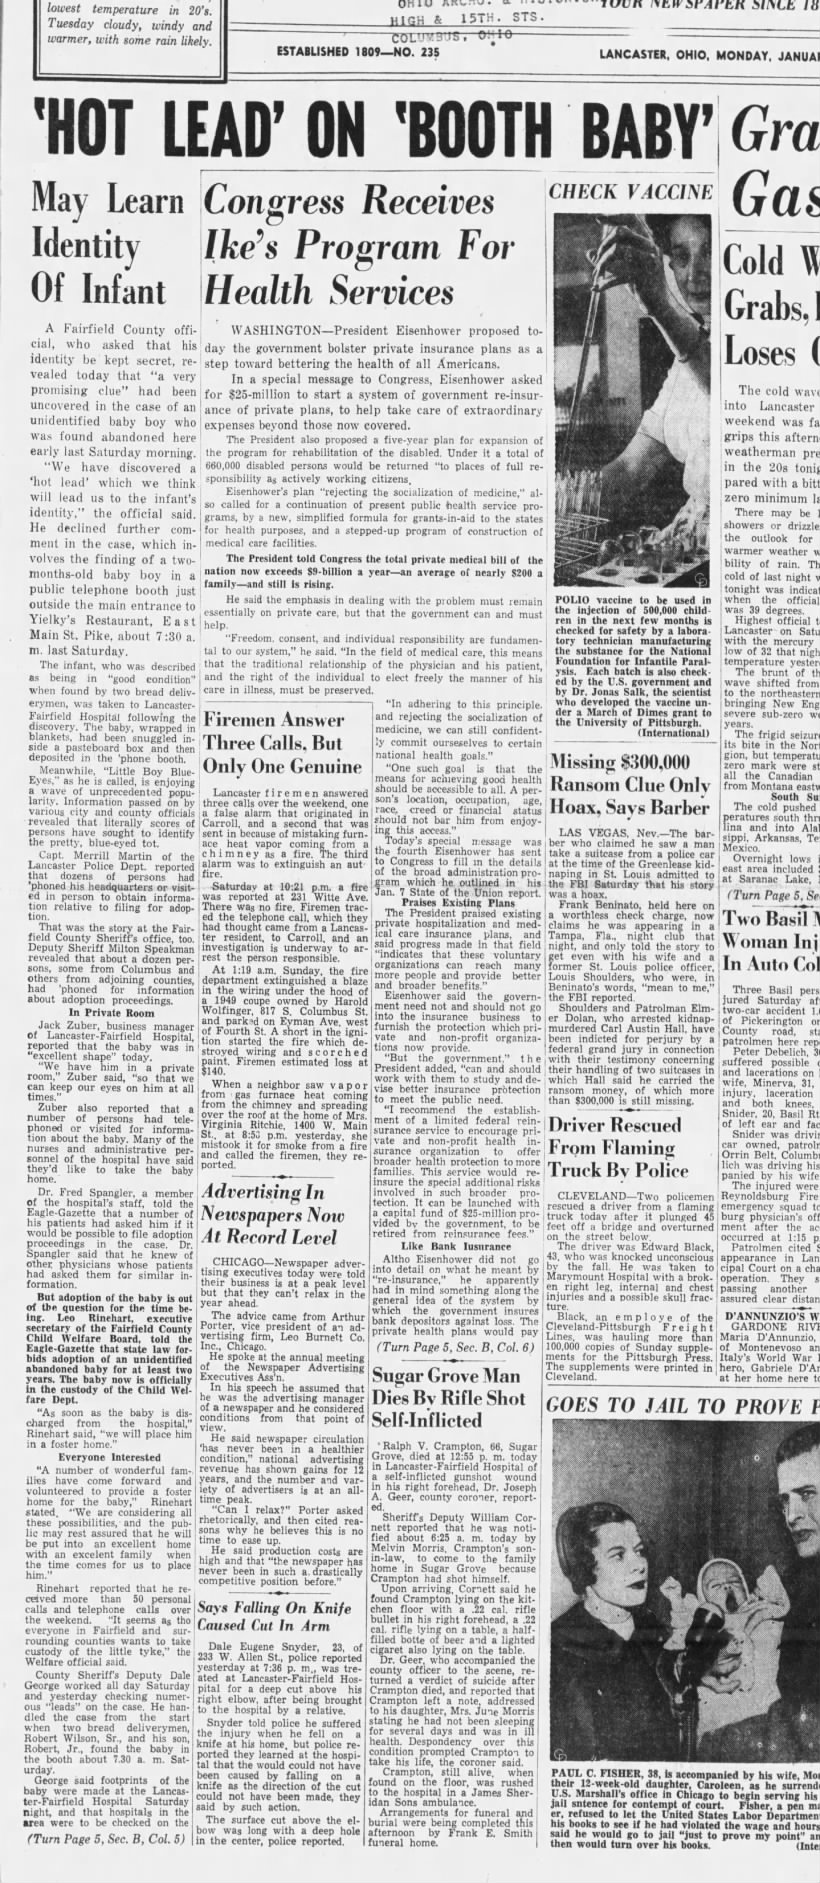 Mon, Jan18, 1954 - 2nd article about abandoned infant, page 1 - cont'd on pg 5. -- Steve